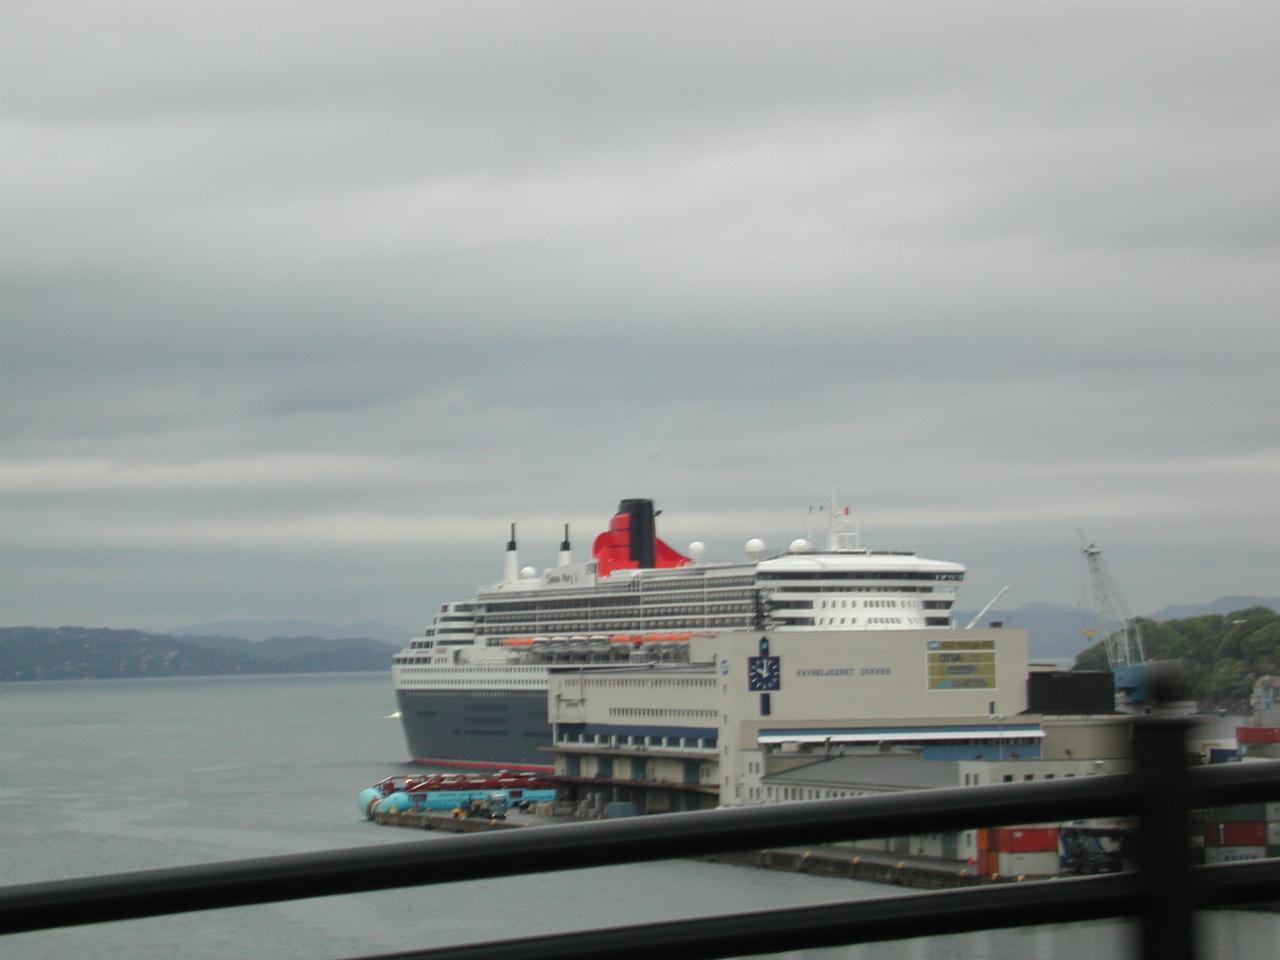 KPLU Viking Jazz: The new Queen Mary, in Bergen for the morning, as seen from bus to airport